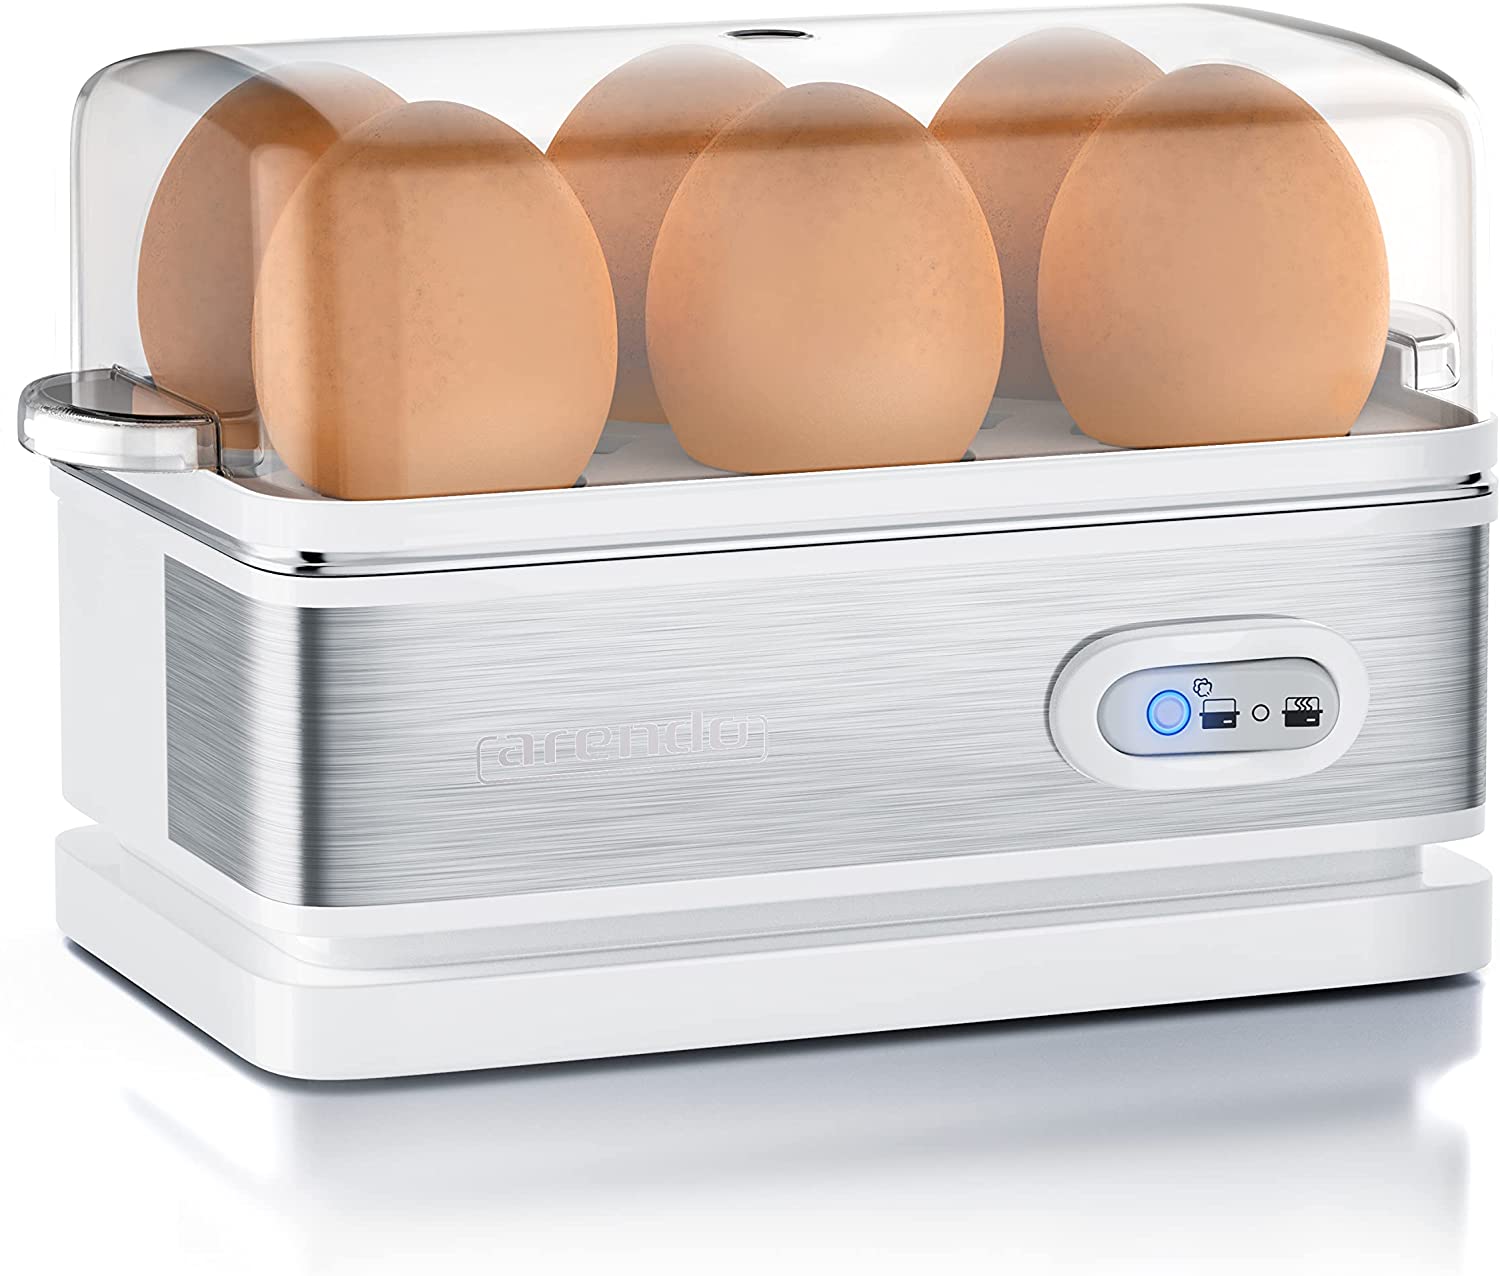 Arendo - Egg cooker stainless steel with warming function - tilt function switch with indicator light - freely selectable hardness - rust-proof brushed stainless steel - white